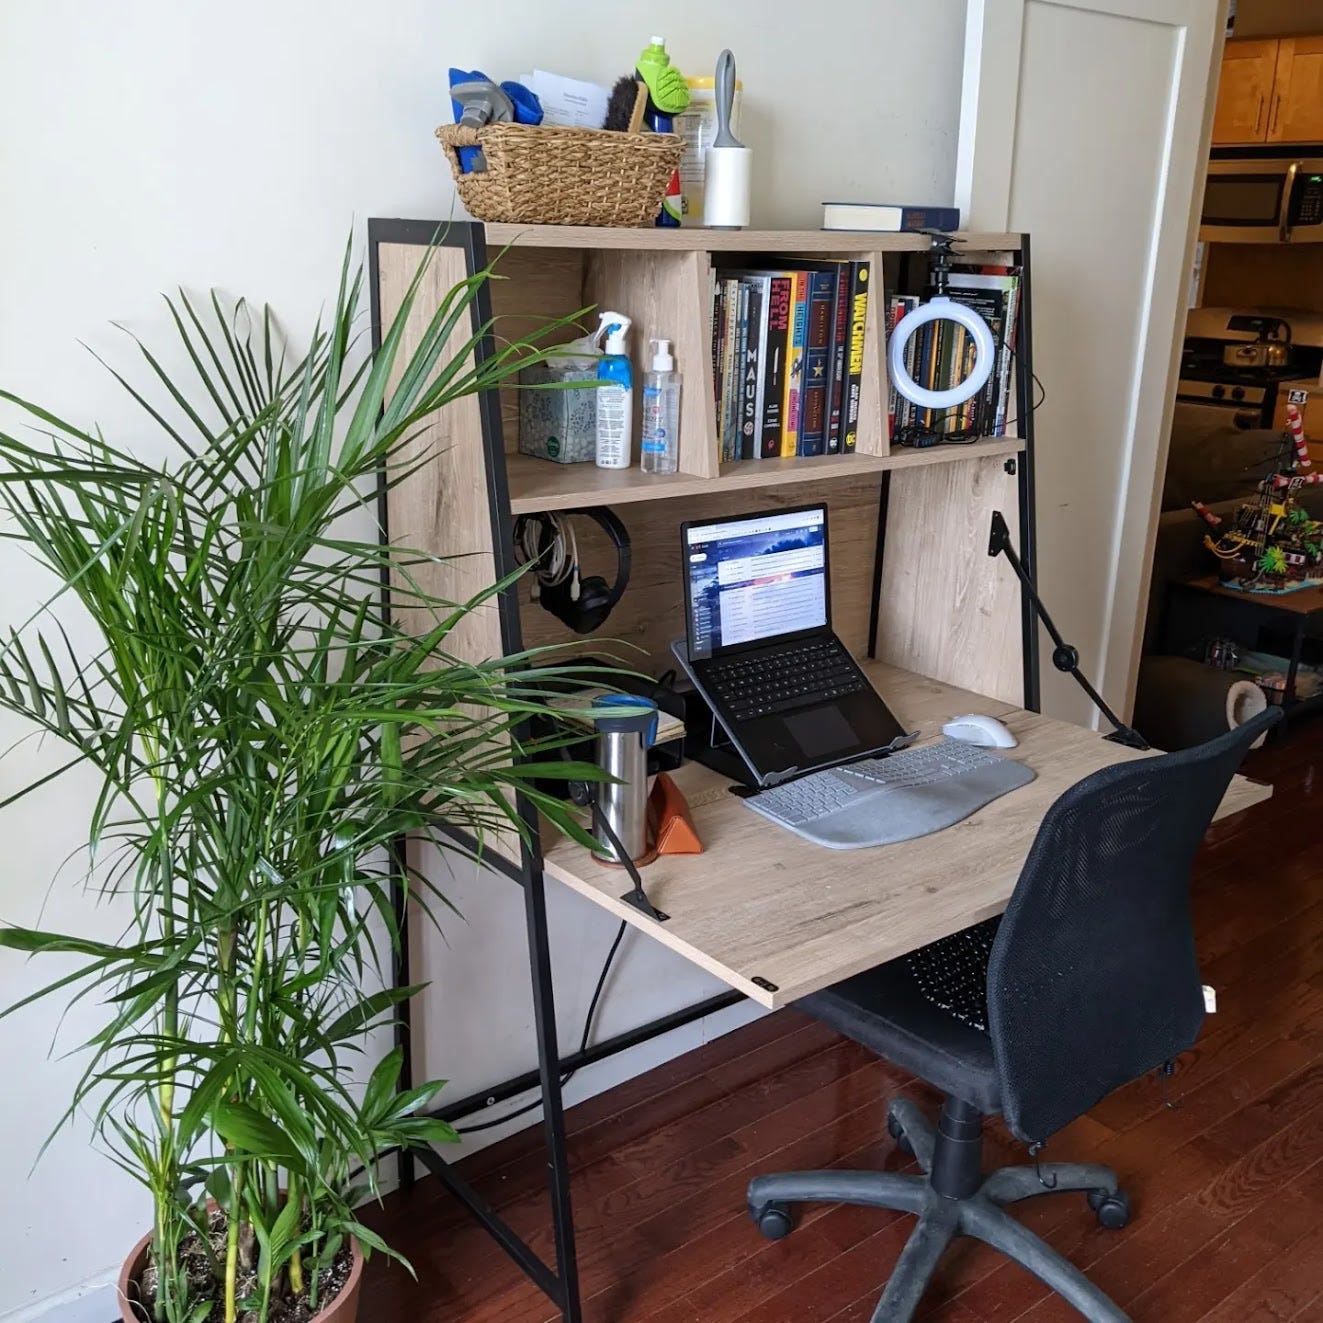 A Bamboo Palm plant next to a desk with a laptop and books